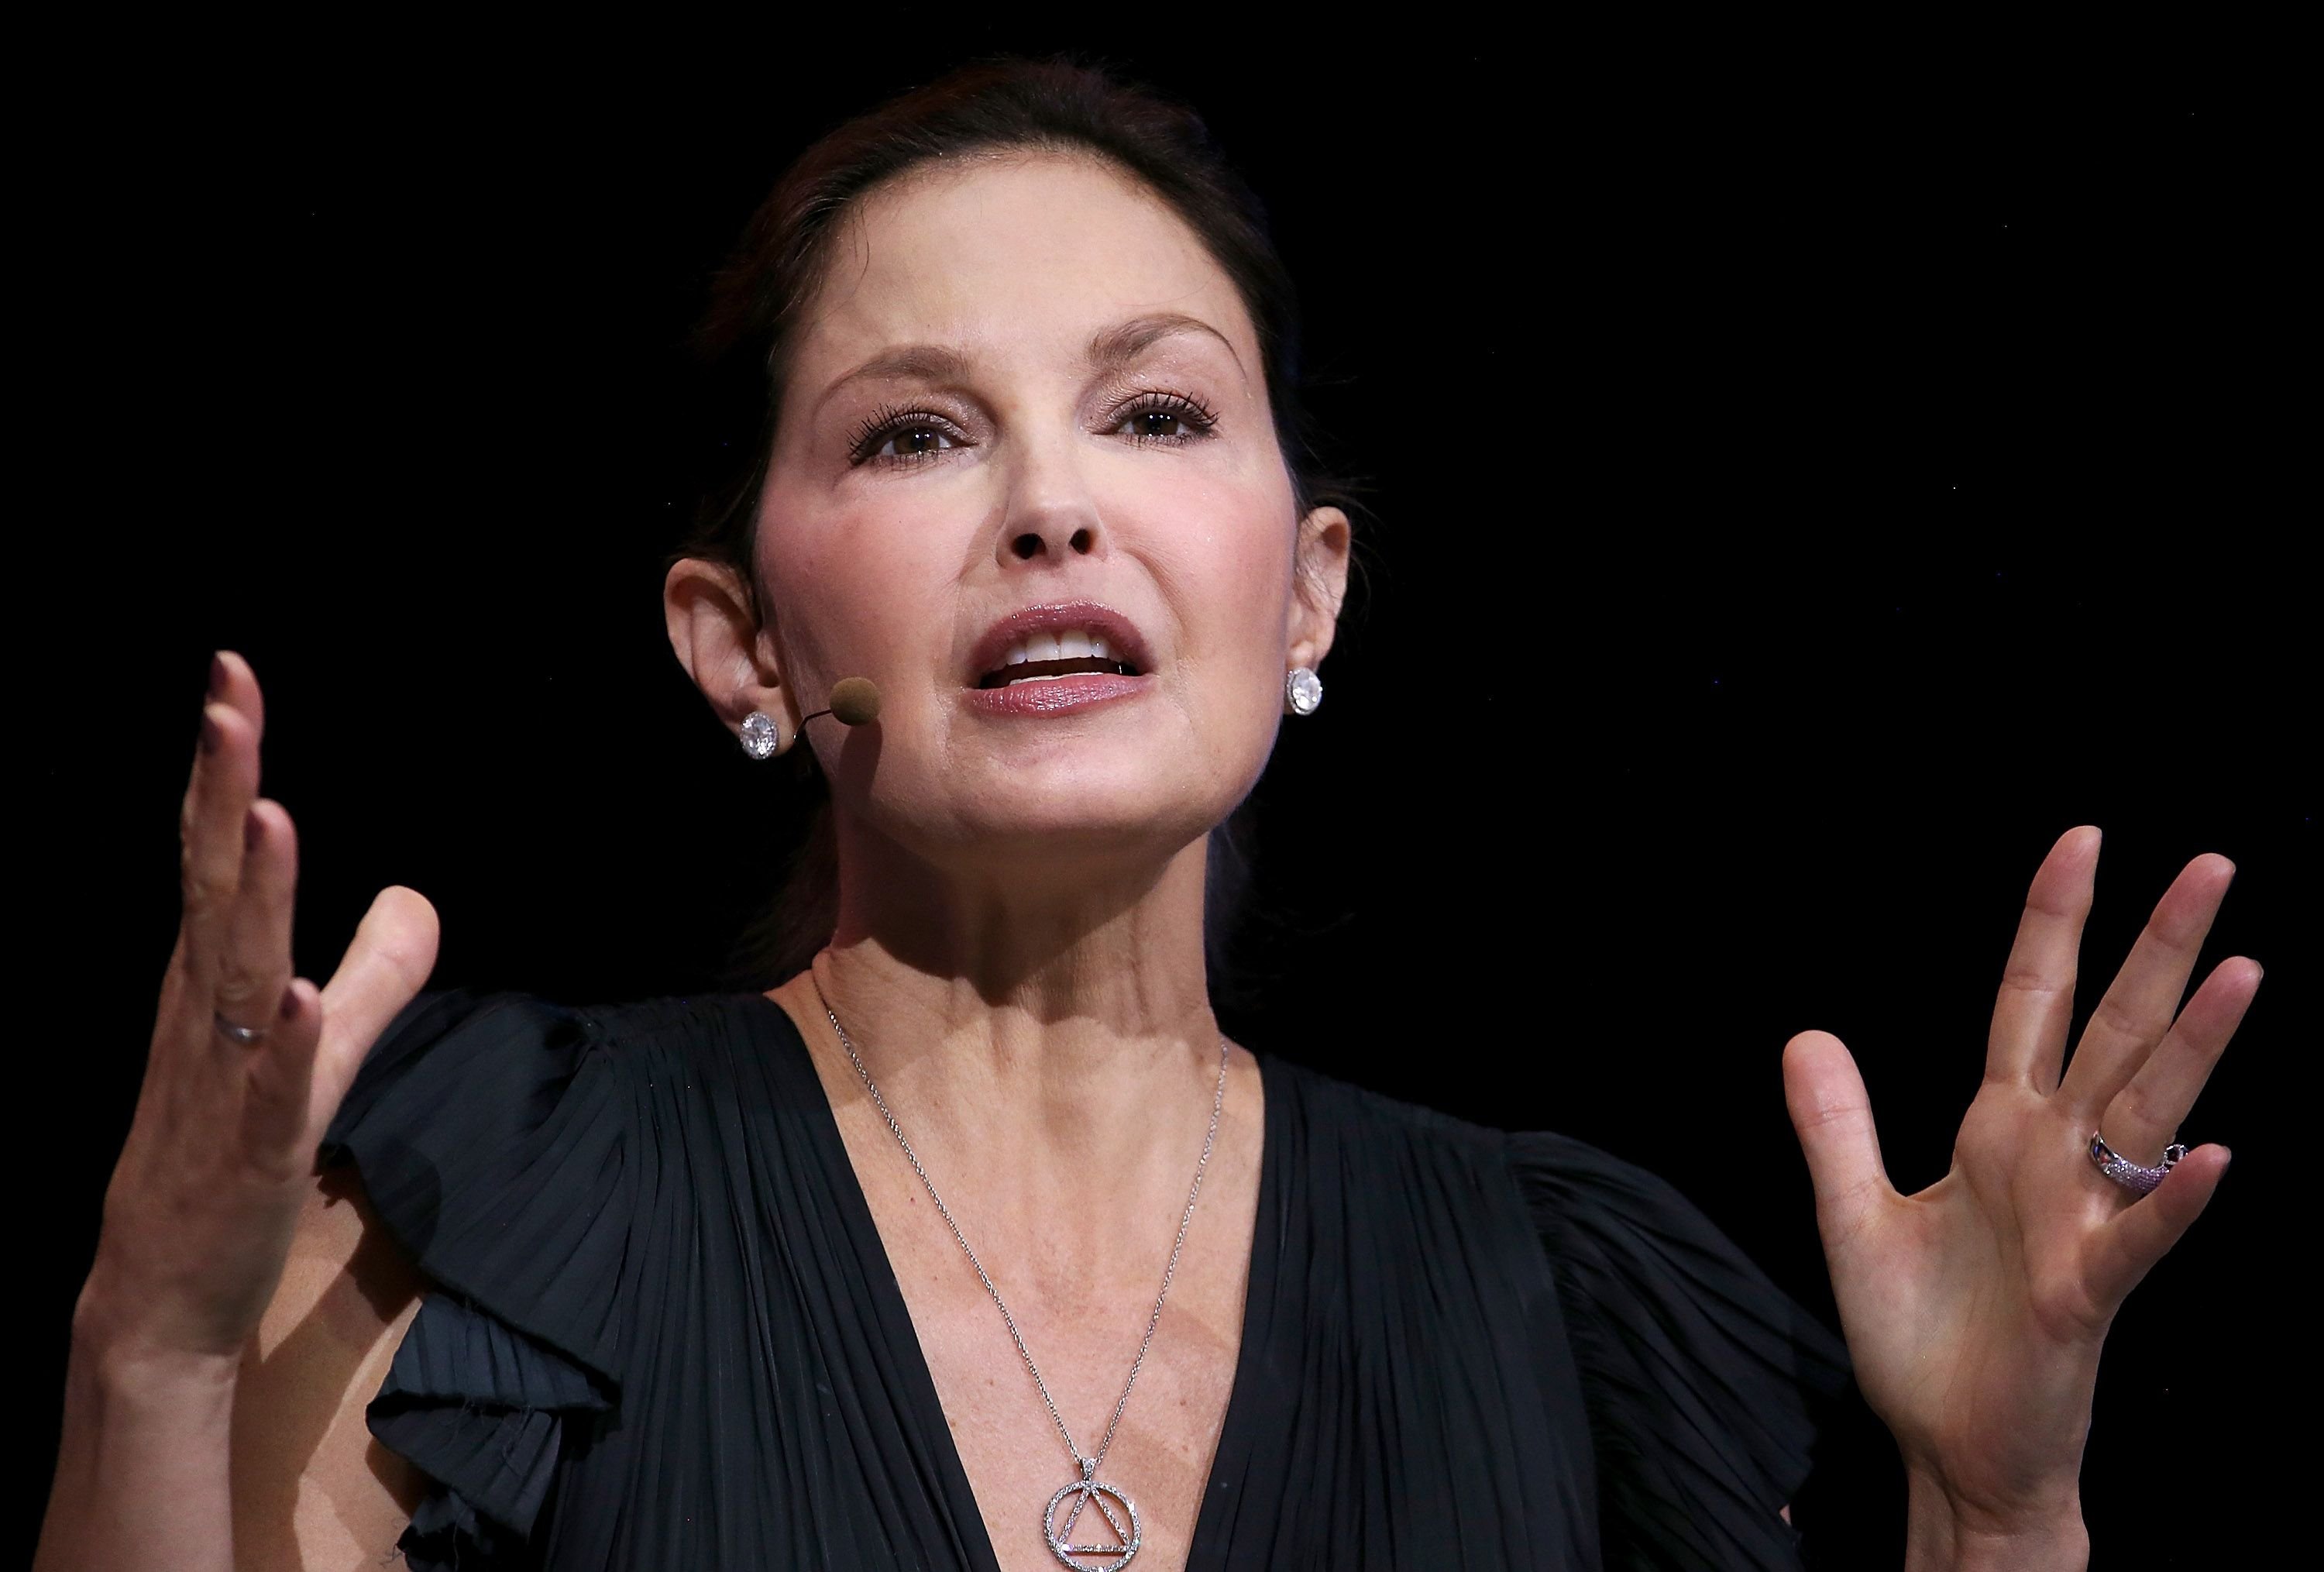  Ashley Judd at the 29th annual Conference of the Professional Businesswomen of California (PBWC) on April 24, 2018 | Getty Images 